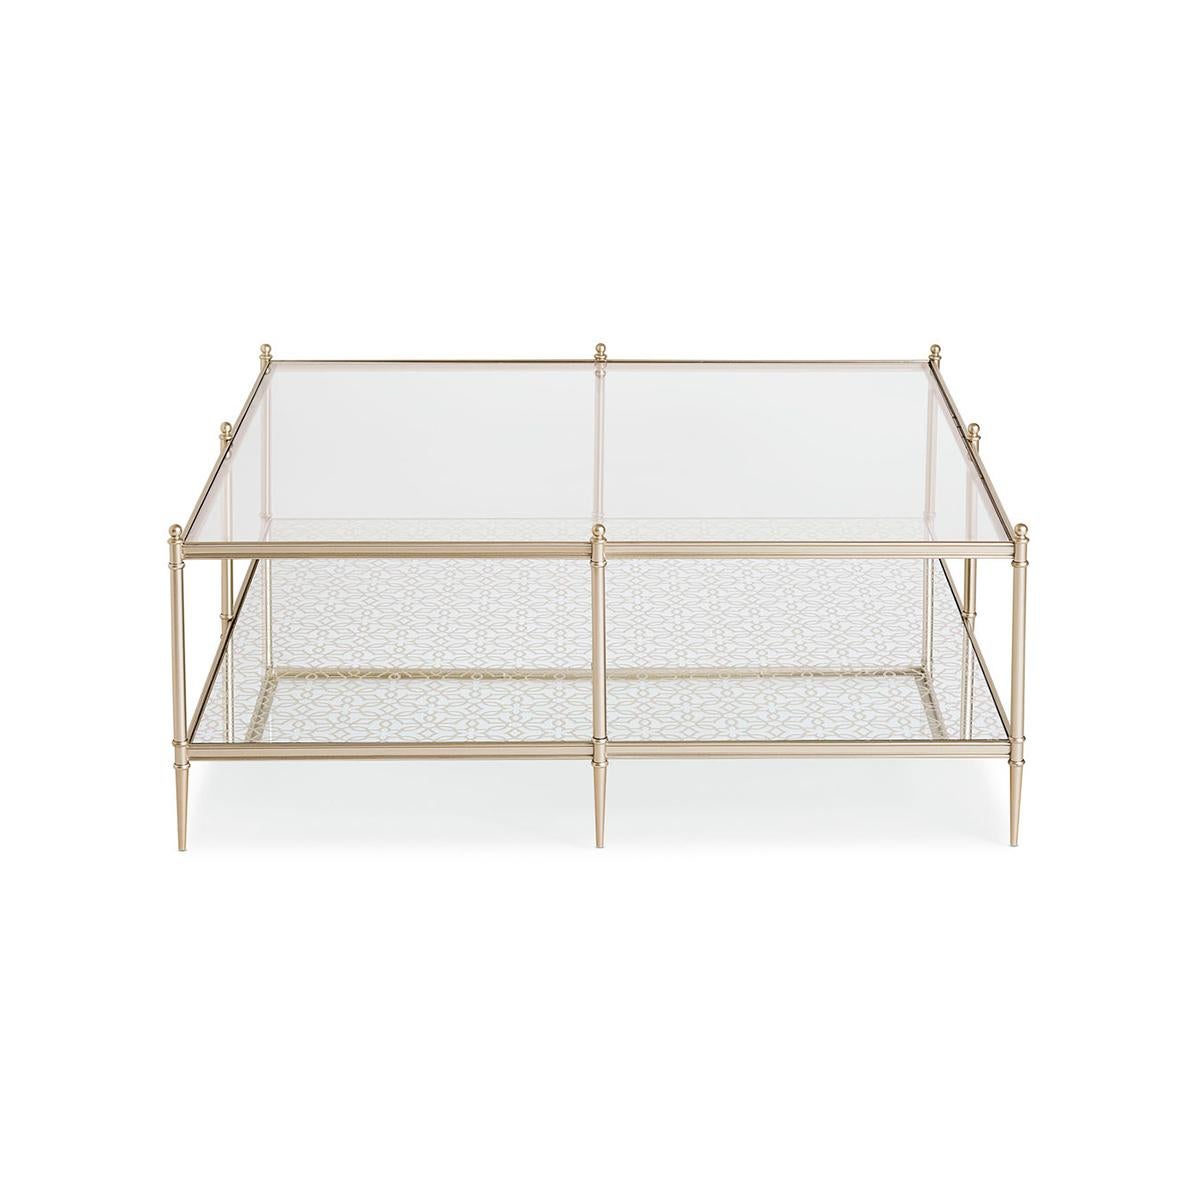 Crafted in a modern mix of materials, its streamlined frame adds a note of luxe in a Neutral metallic finish. A clear glass top reveals a mirrored shelf below, back-painted in a Silver Leaf, mosaic pattern for added dimension.

A clear glass top